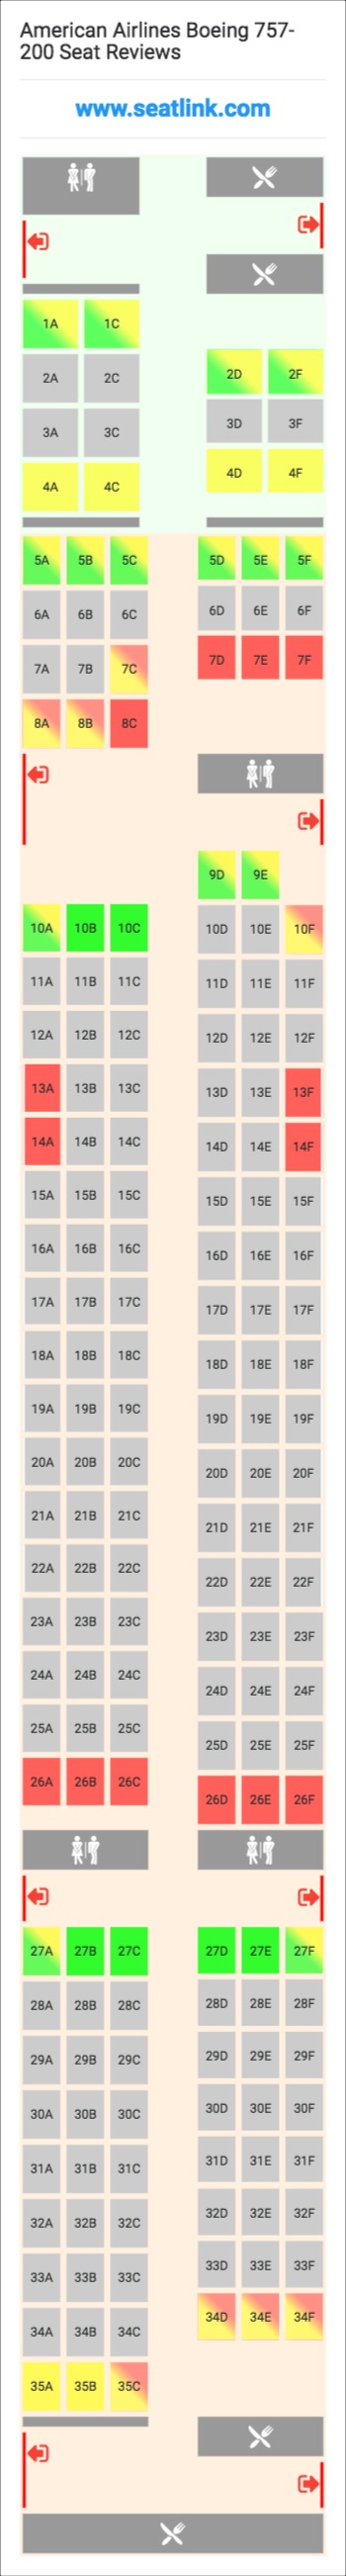 American Airlines Boeing 757-200 (752) Seat Map